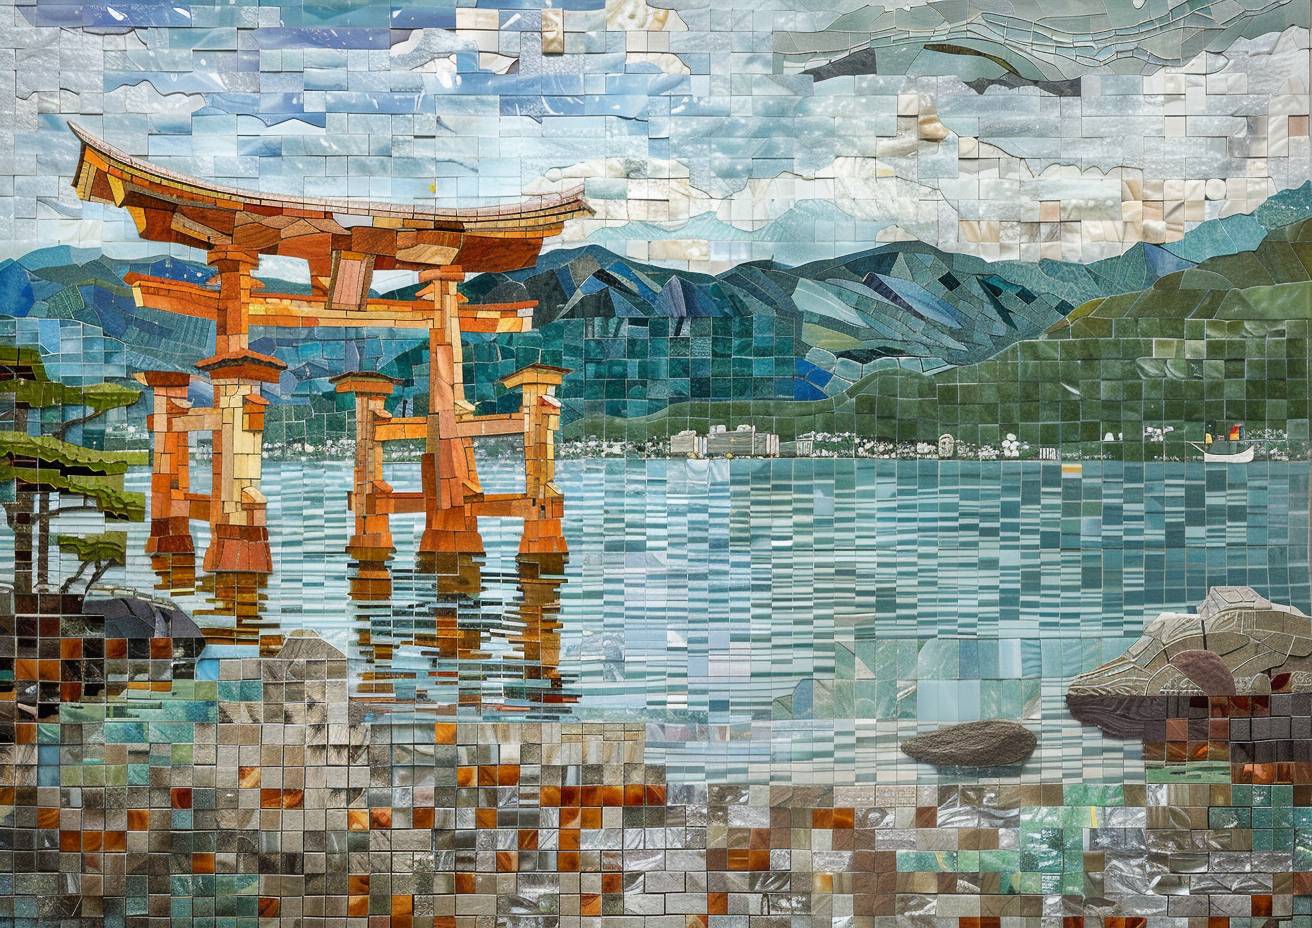 Sea glass mosaic, intricate detail, depicting a lakeside shrine, floating Torii gate, rippling reflections, mountains in background, strong visual flow.